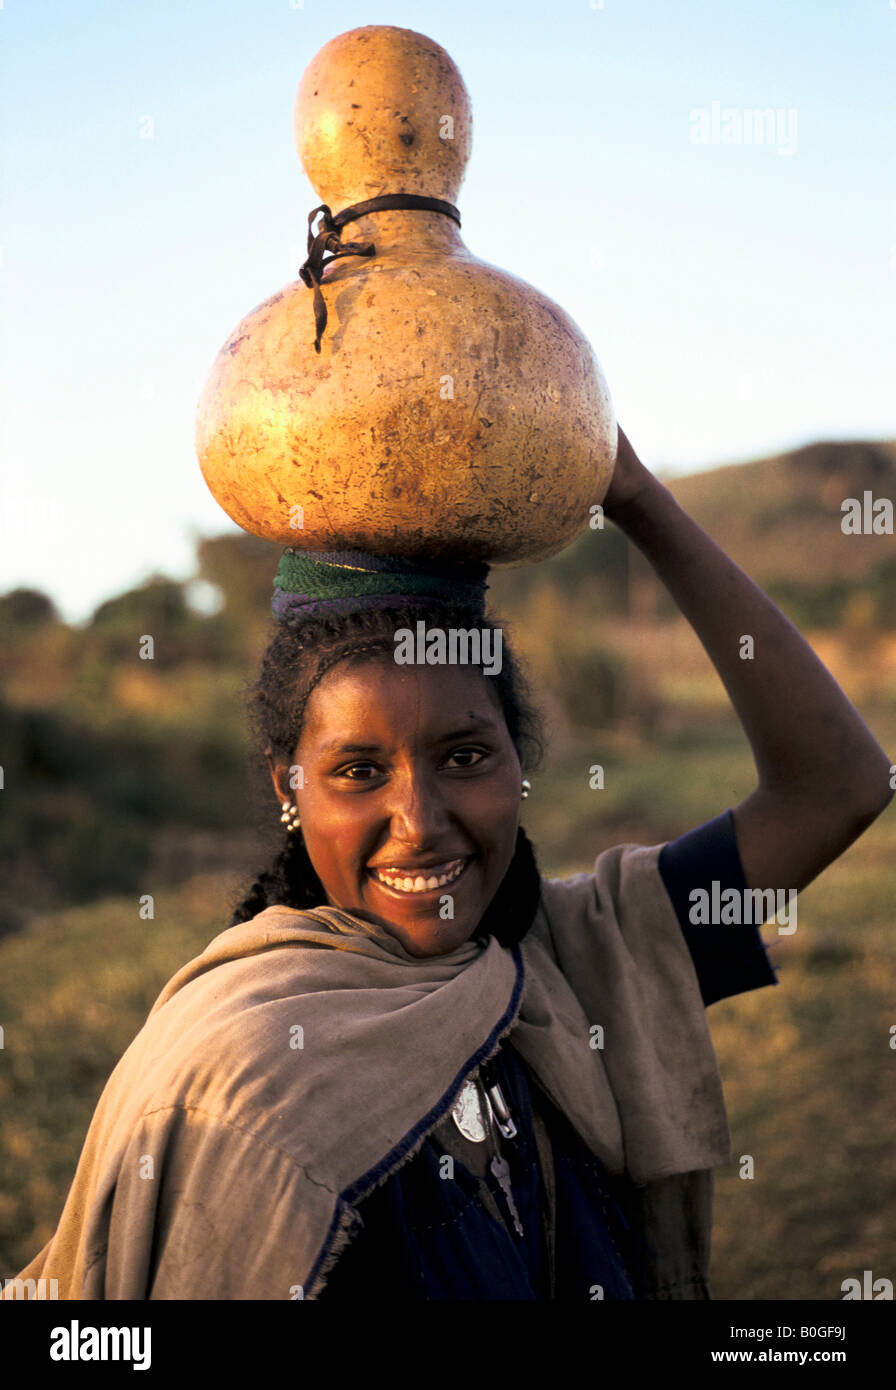 A woman fetching water in a gourd, Gonder, Ethiopia. Stock Photo